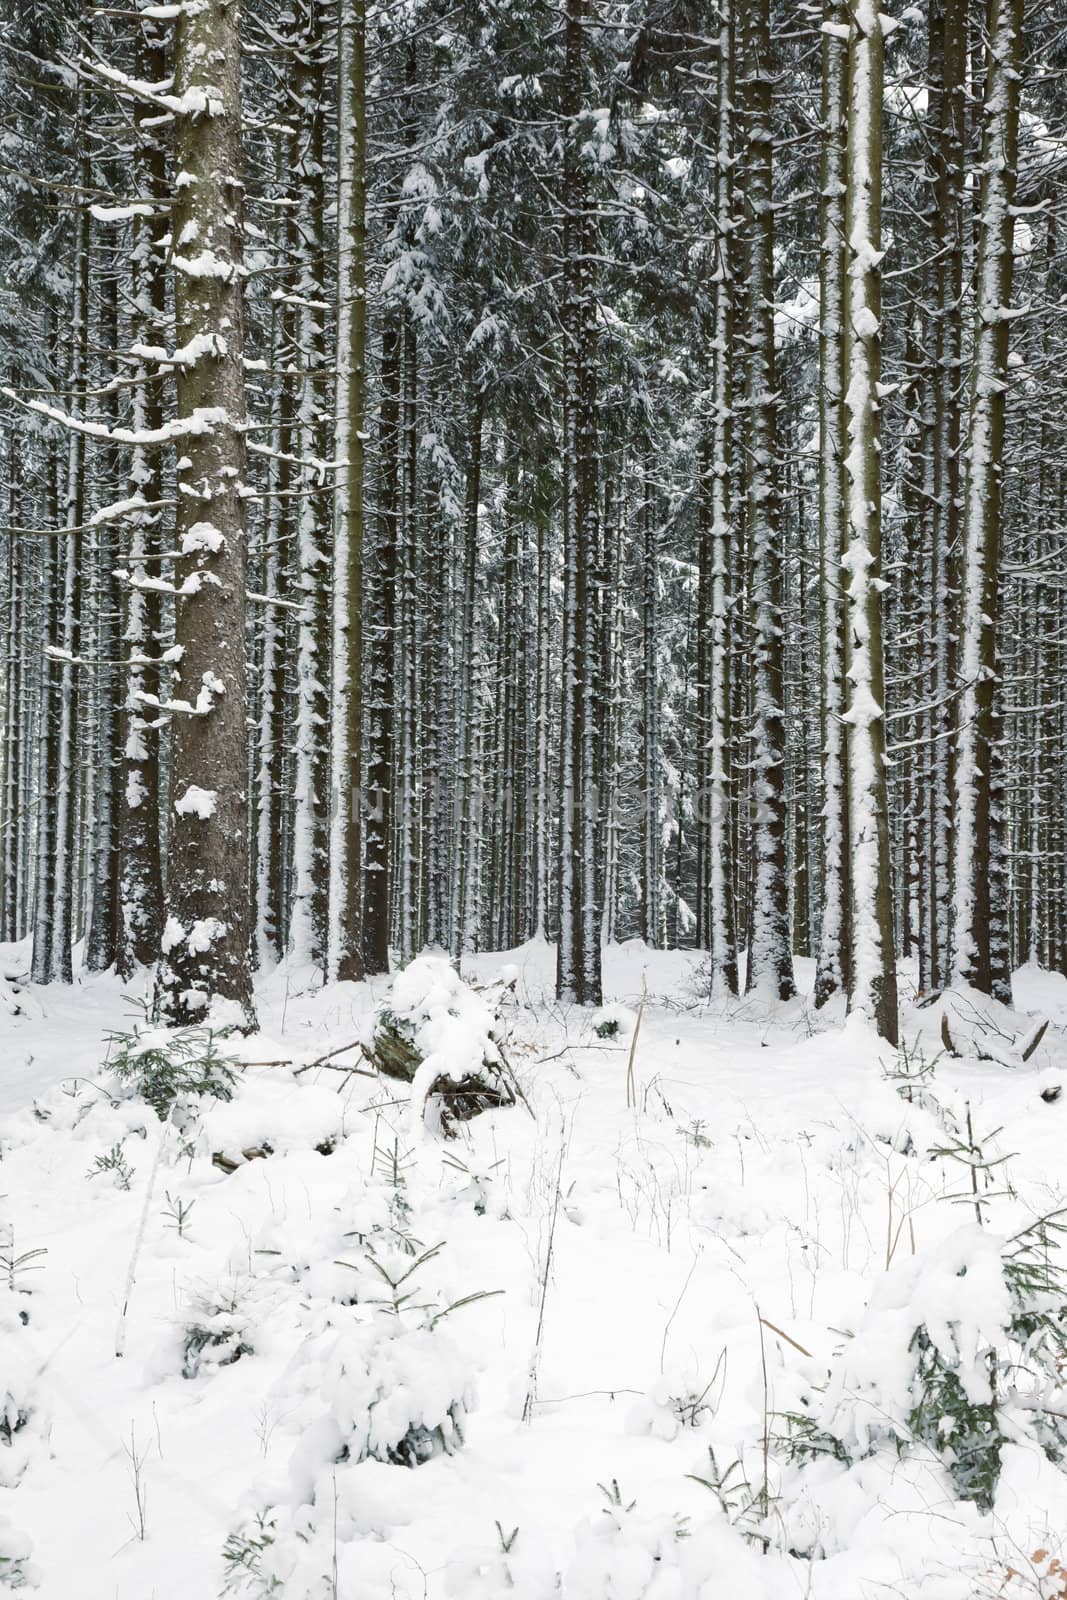 An image of a deep winter snowy forest